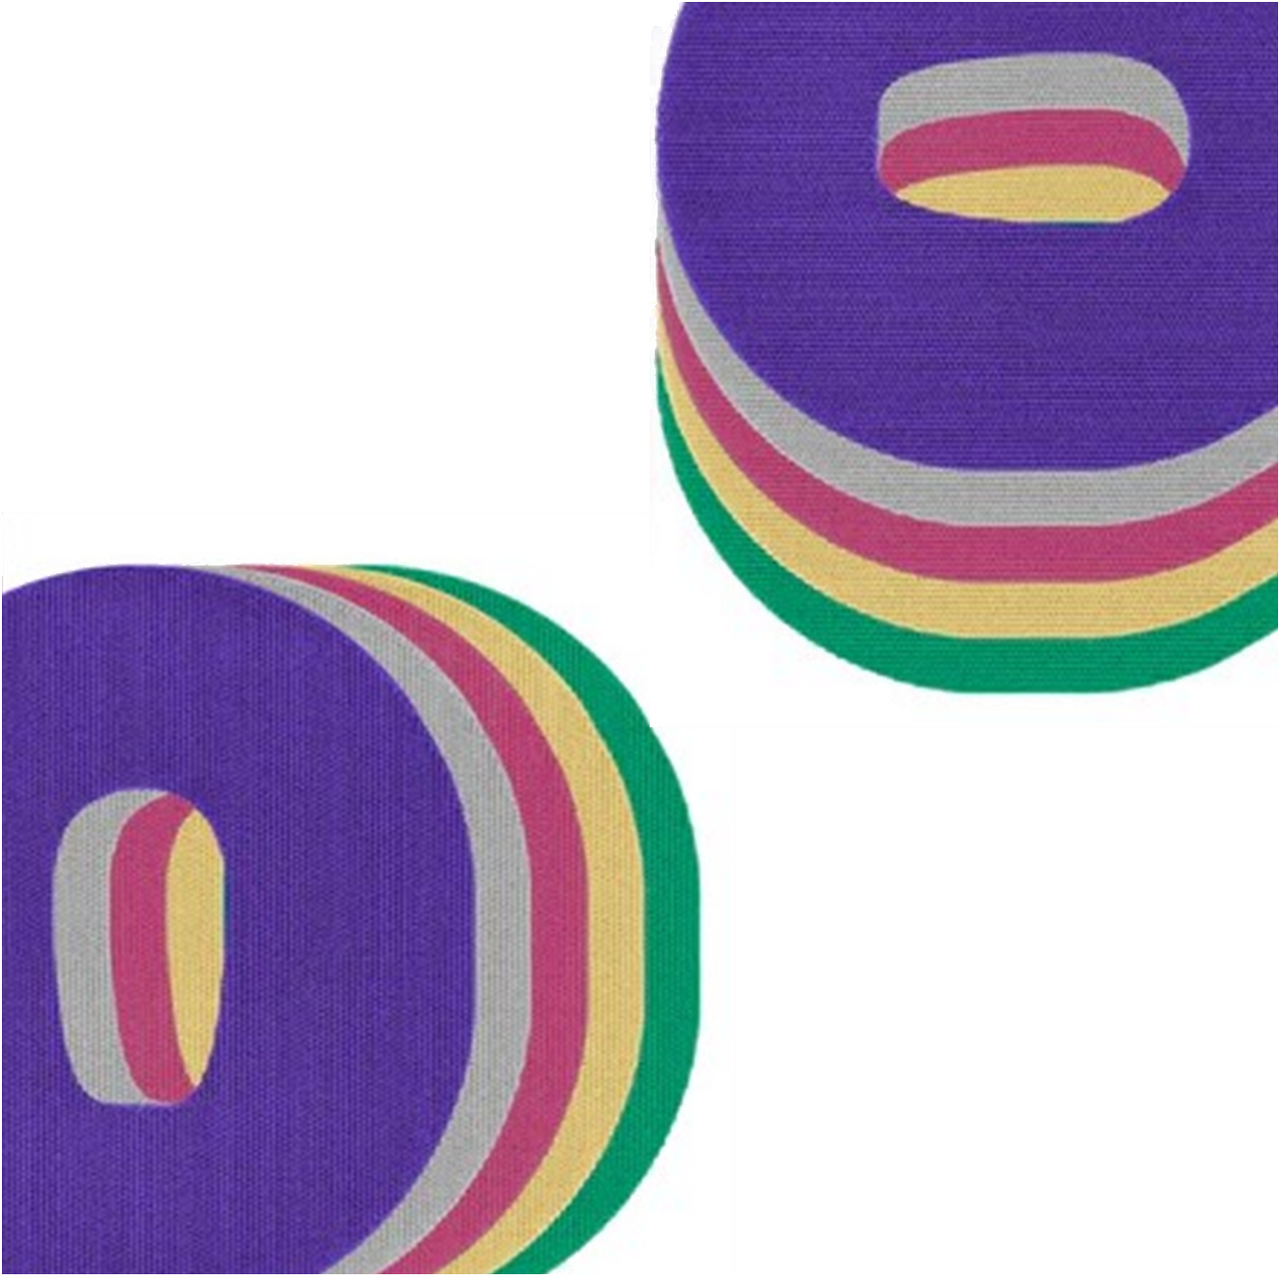 Overt Dexcom G6 Adhesive Guards Monitoring Patch - Pastels [5 Pack]